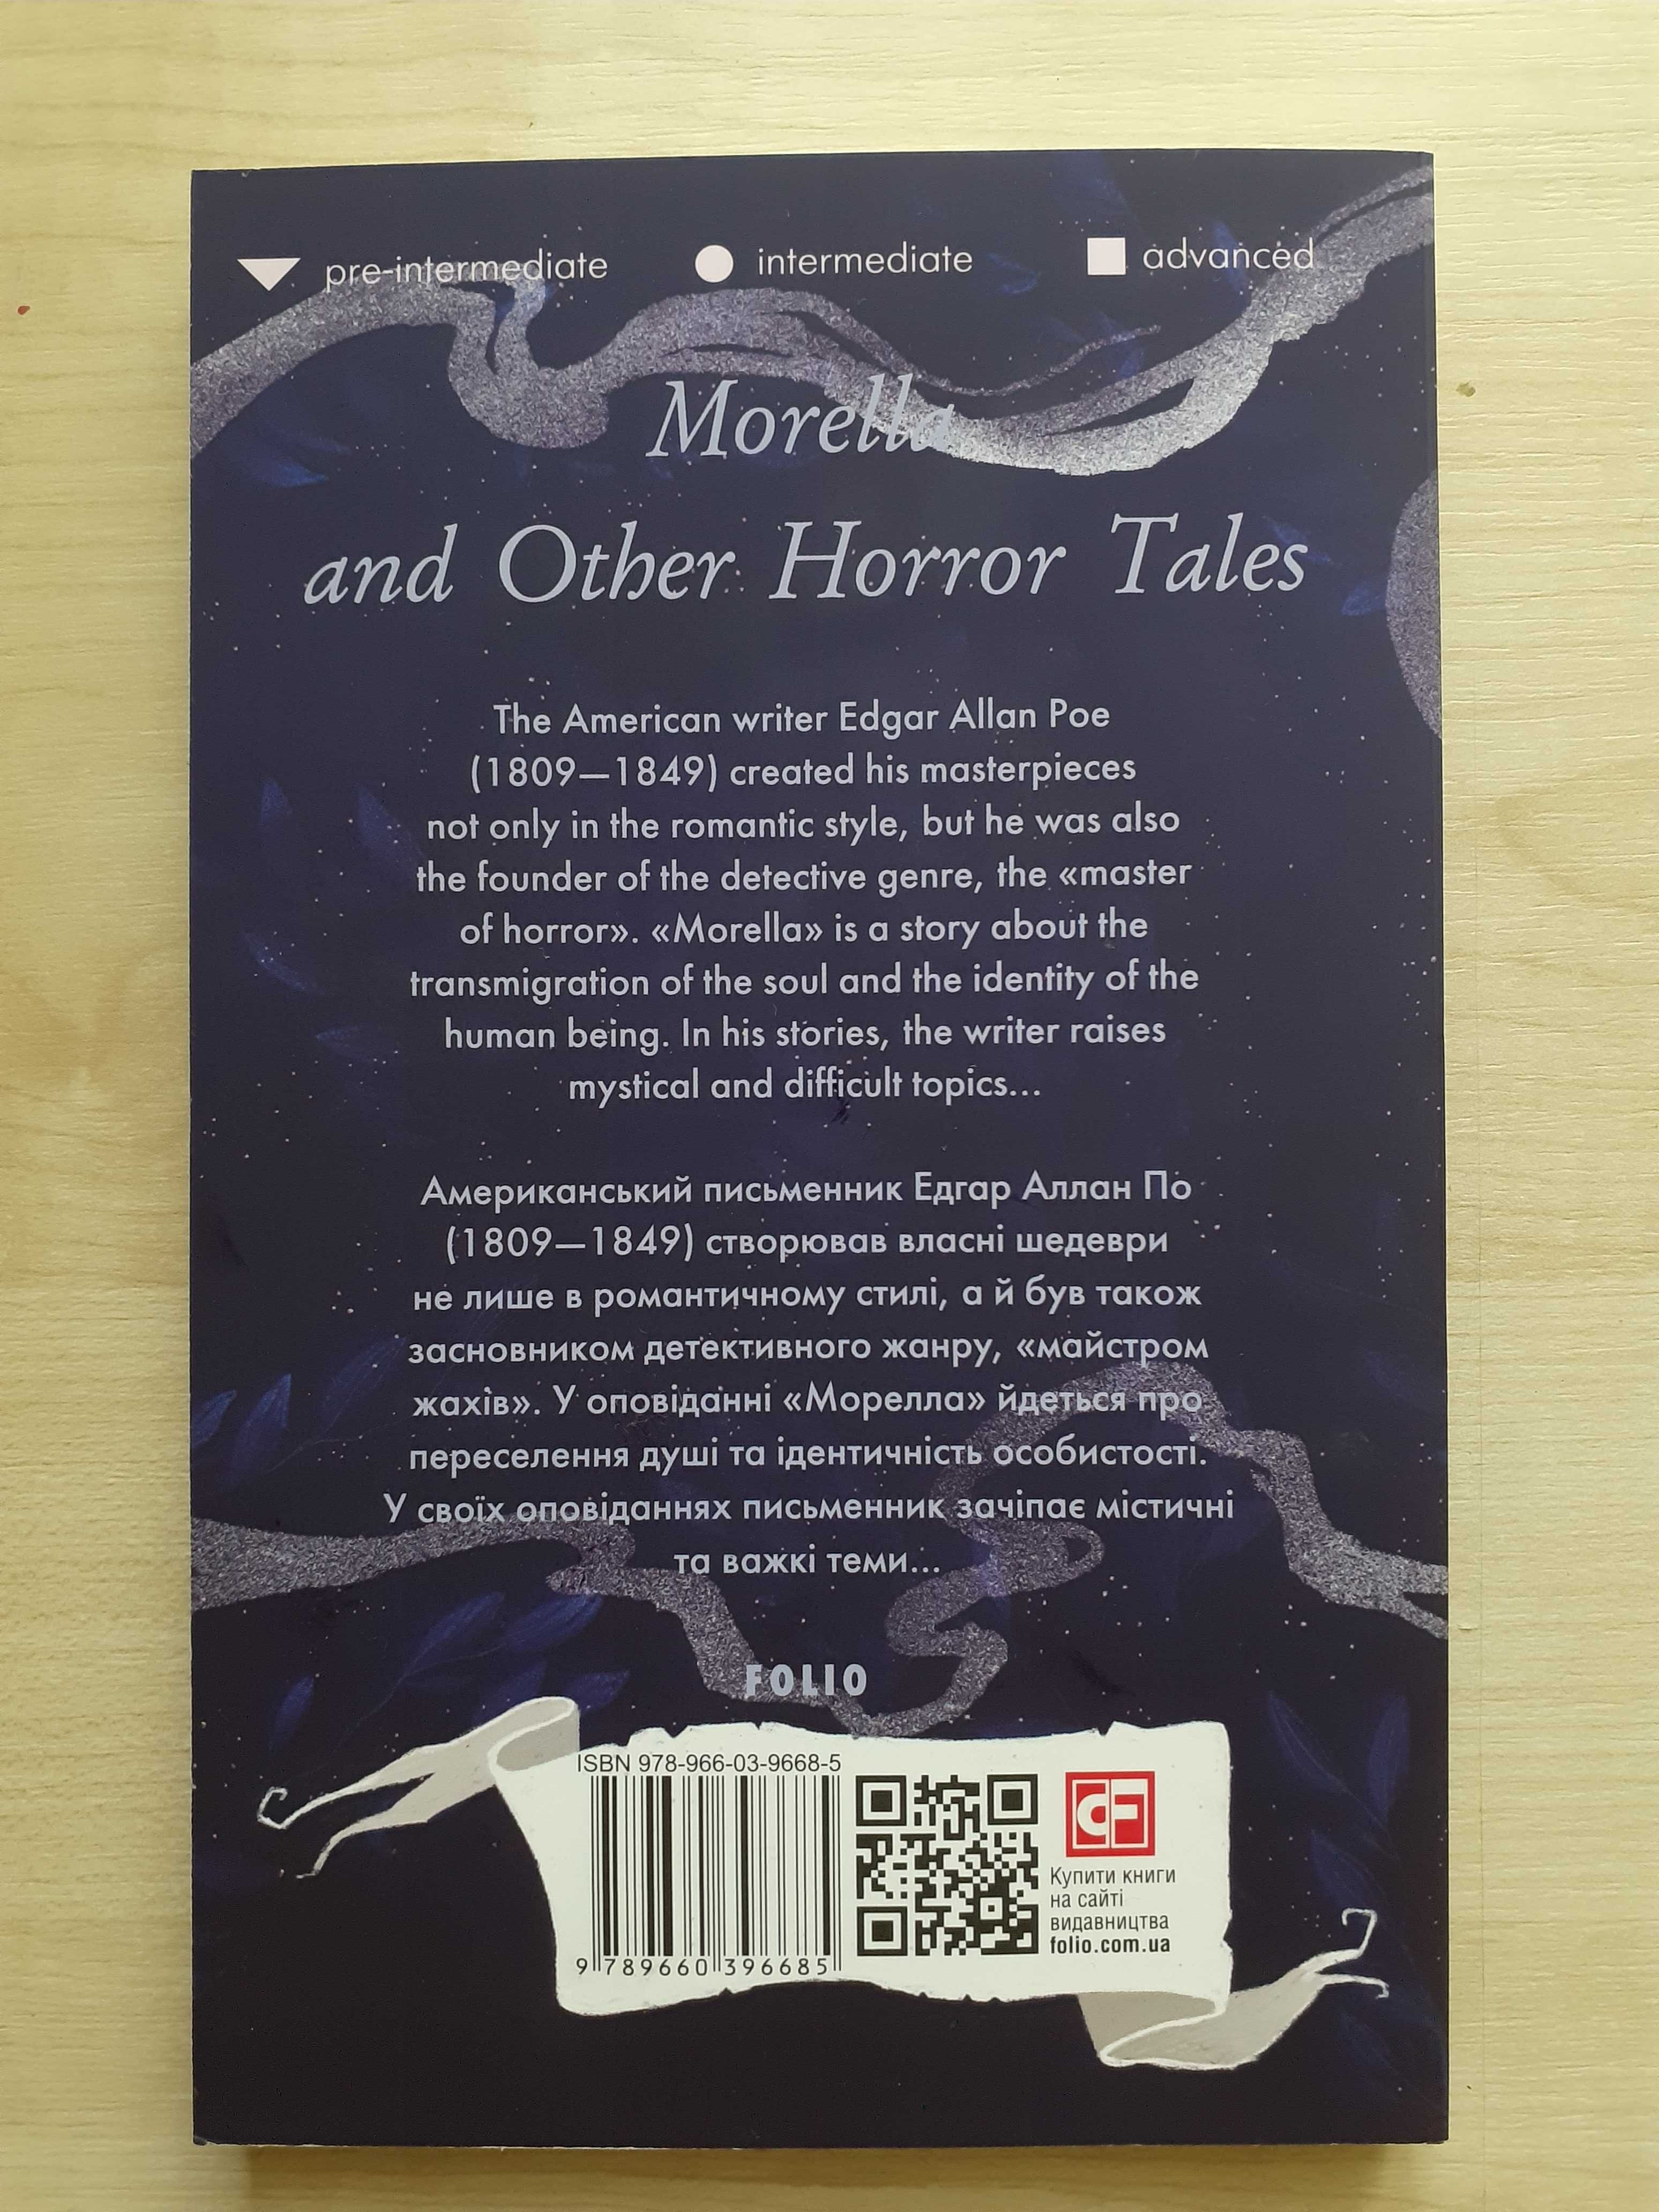 Edgar Allan Poe - "Morella and Other Horror Tales"